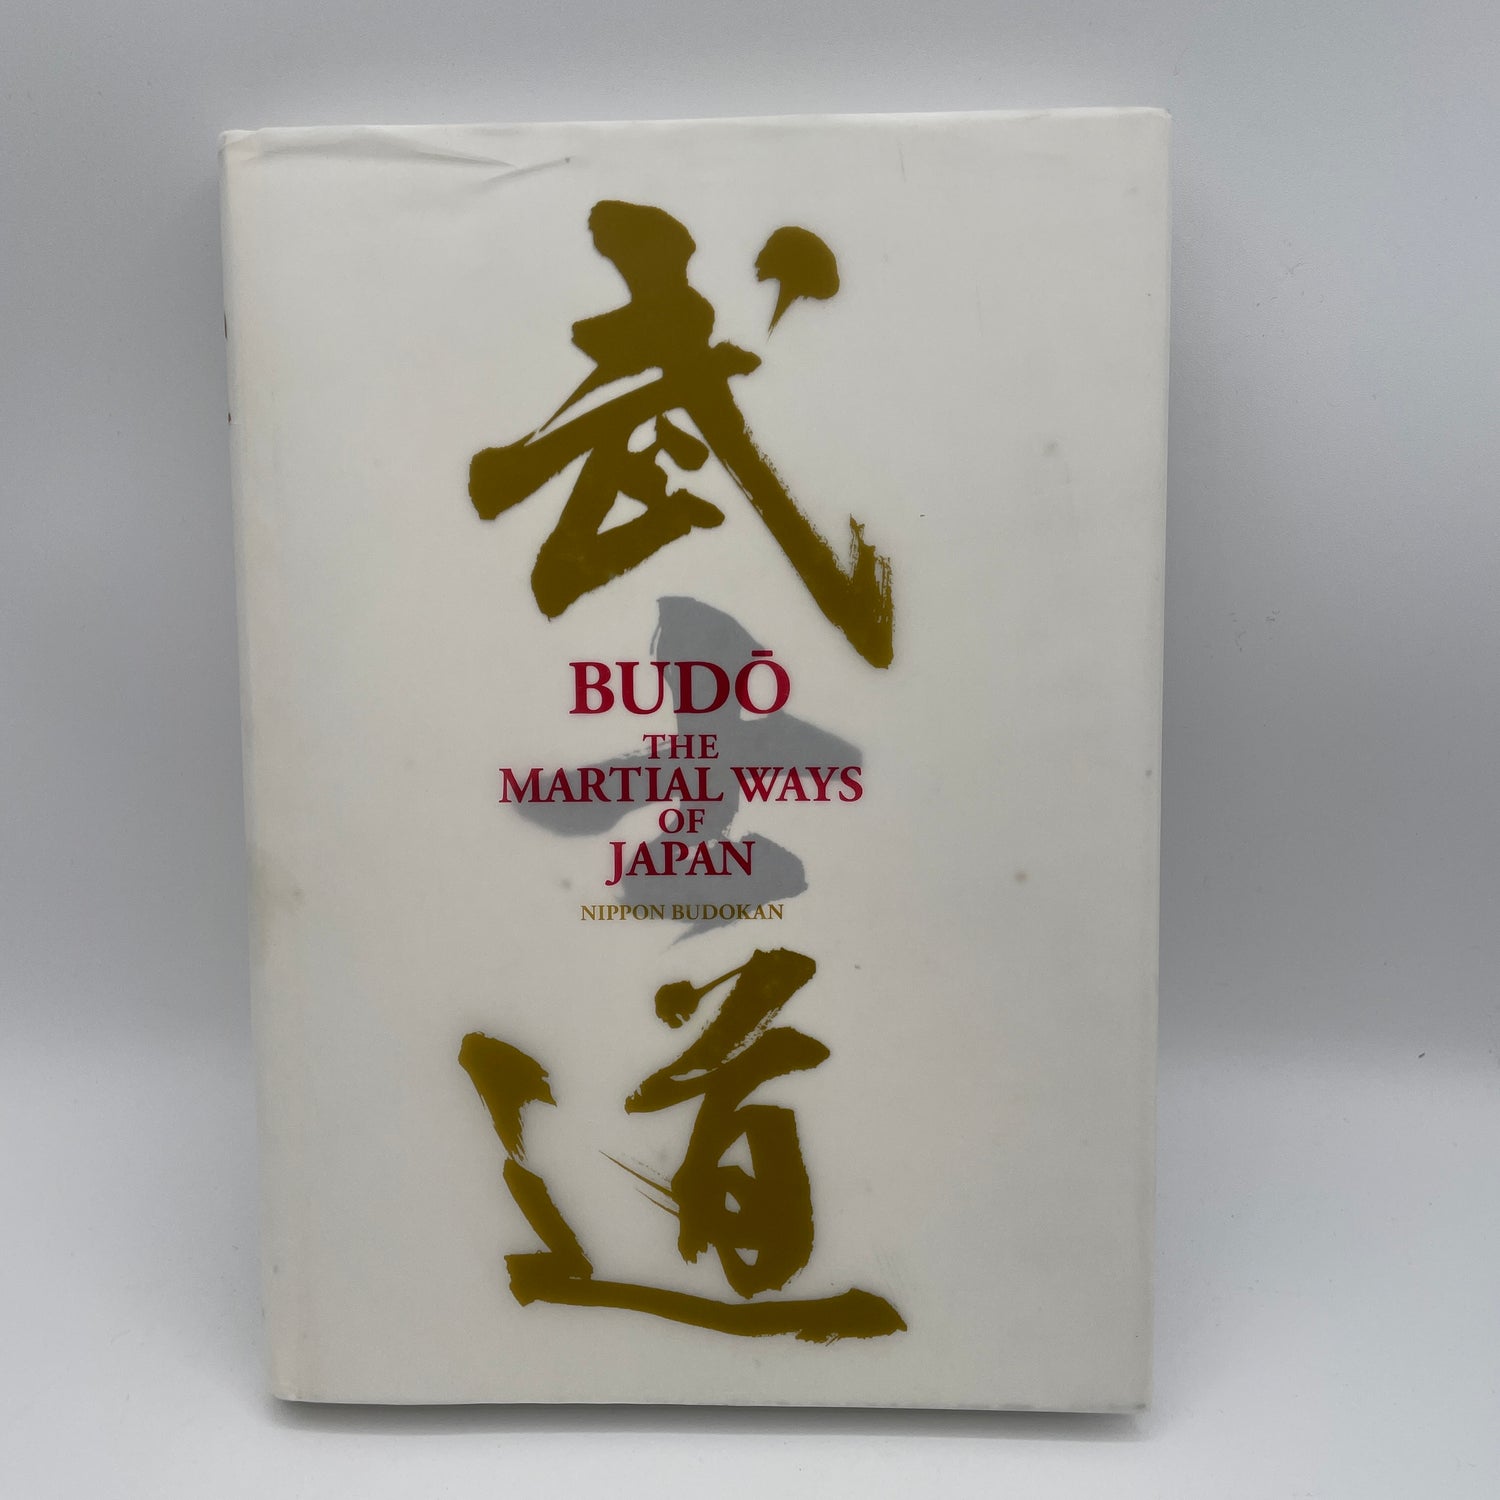 Budo: The Martial Ways of Japan Book & DVD by Nippon Budokan (Preowned)